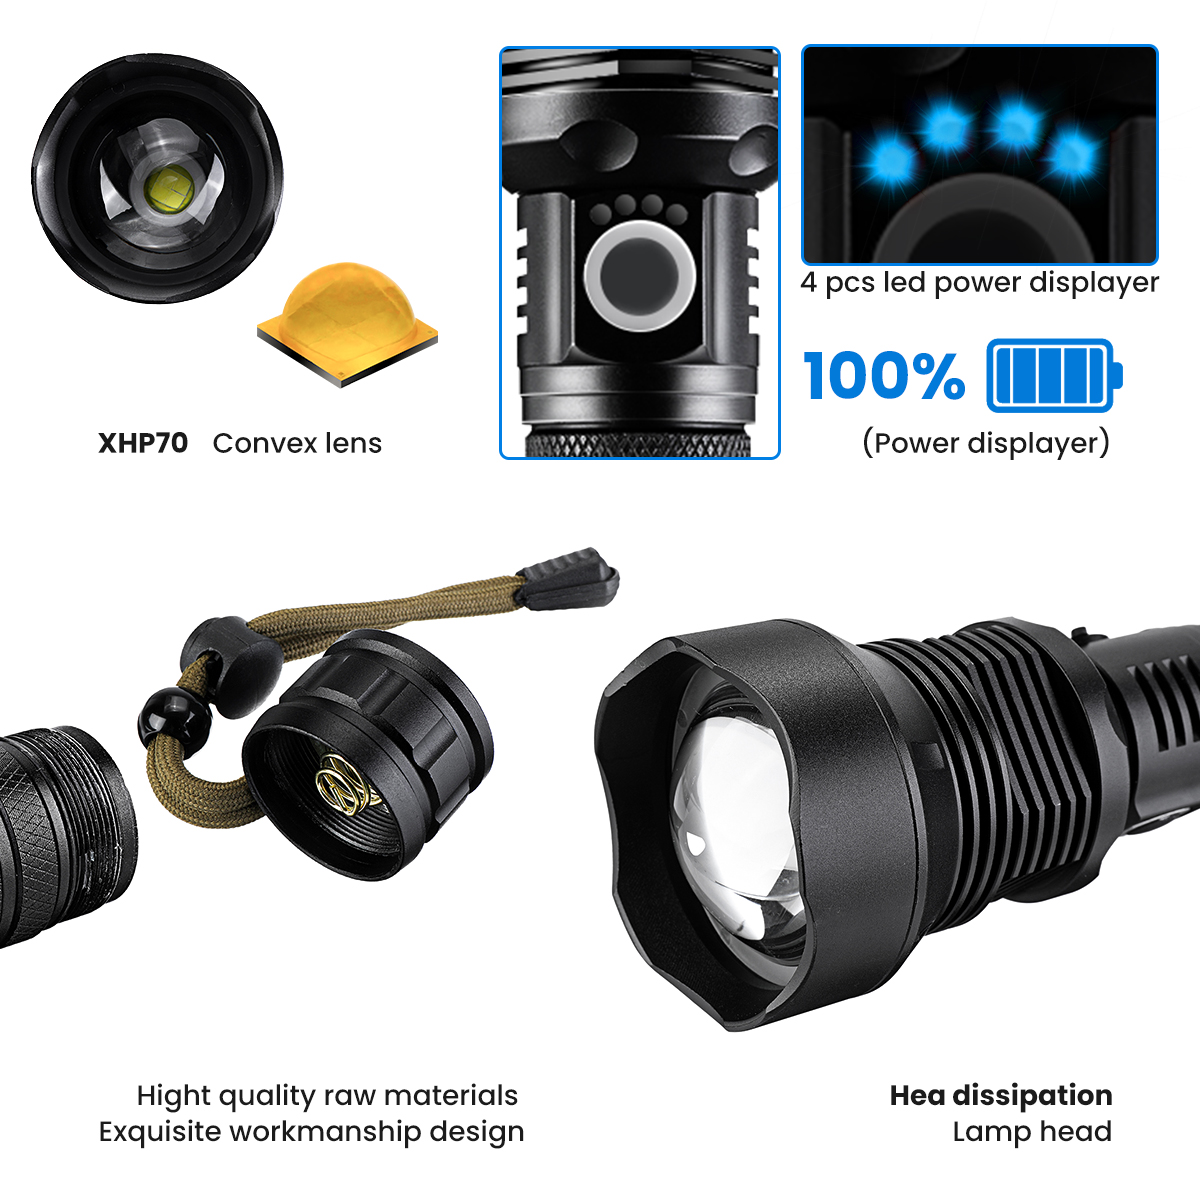 XHP702-900LM-Zoomable-LED-Flashlight-Kit-with-2x-26650-Li-ion-Battery-USB-Rechargeable-Super-Bright--1714246-4